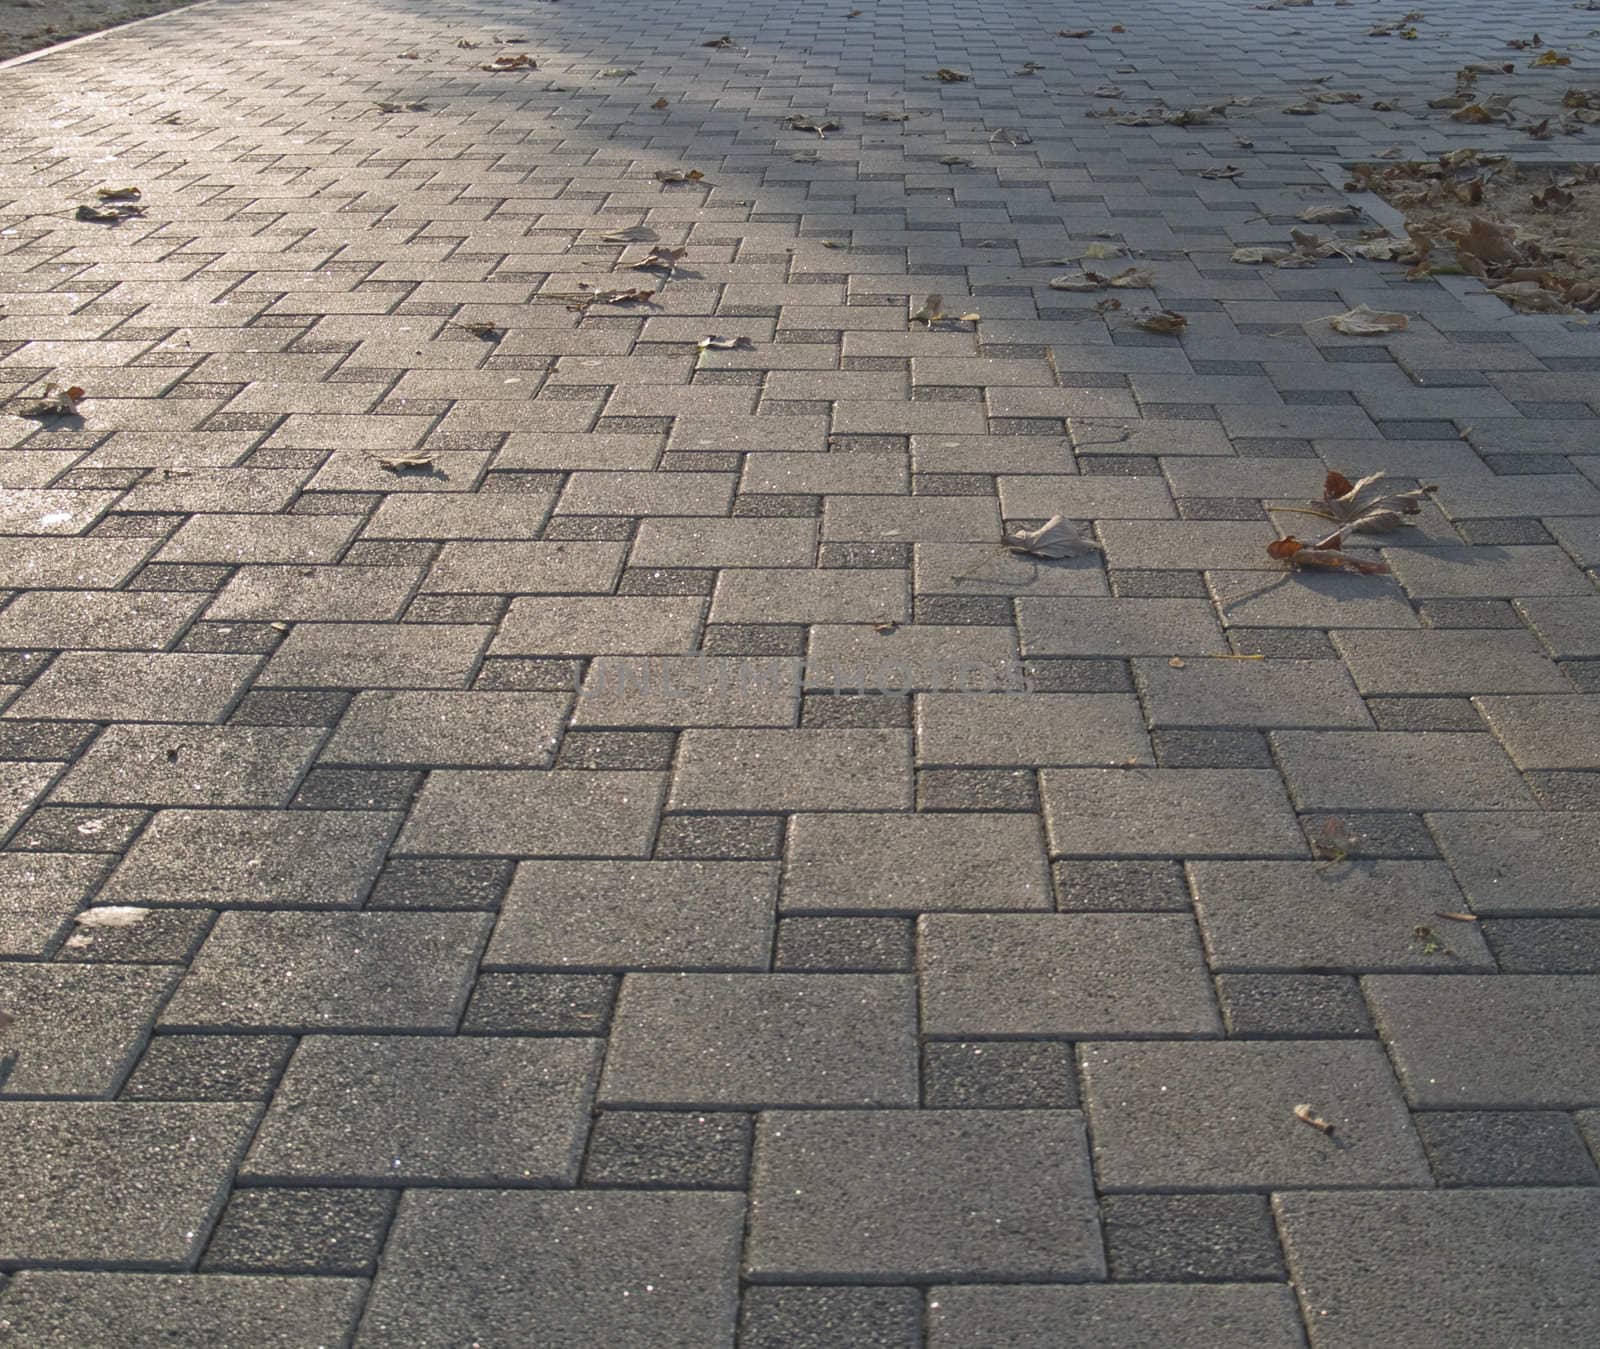 Paving stones which can be used as a background